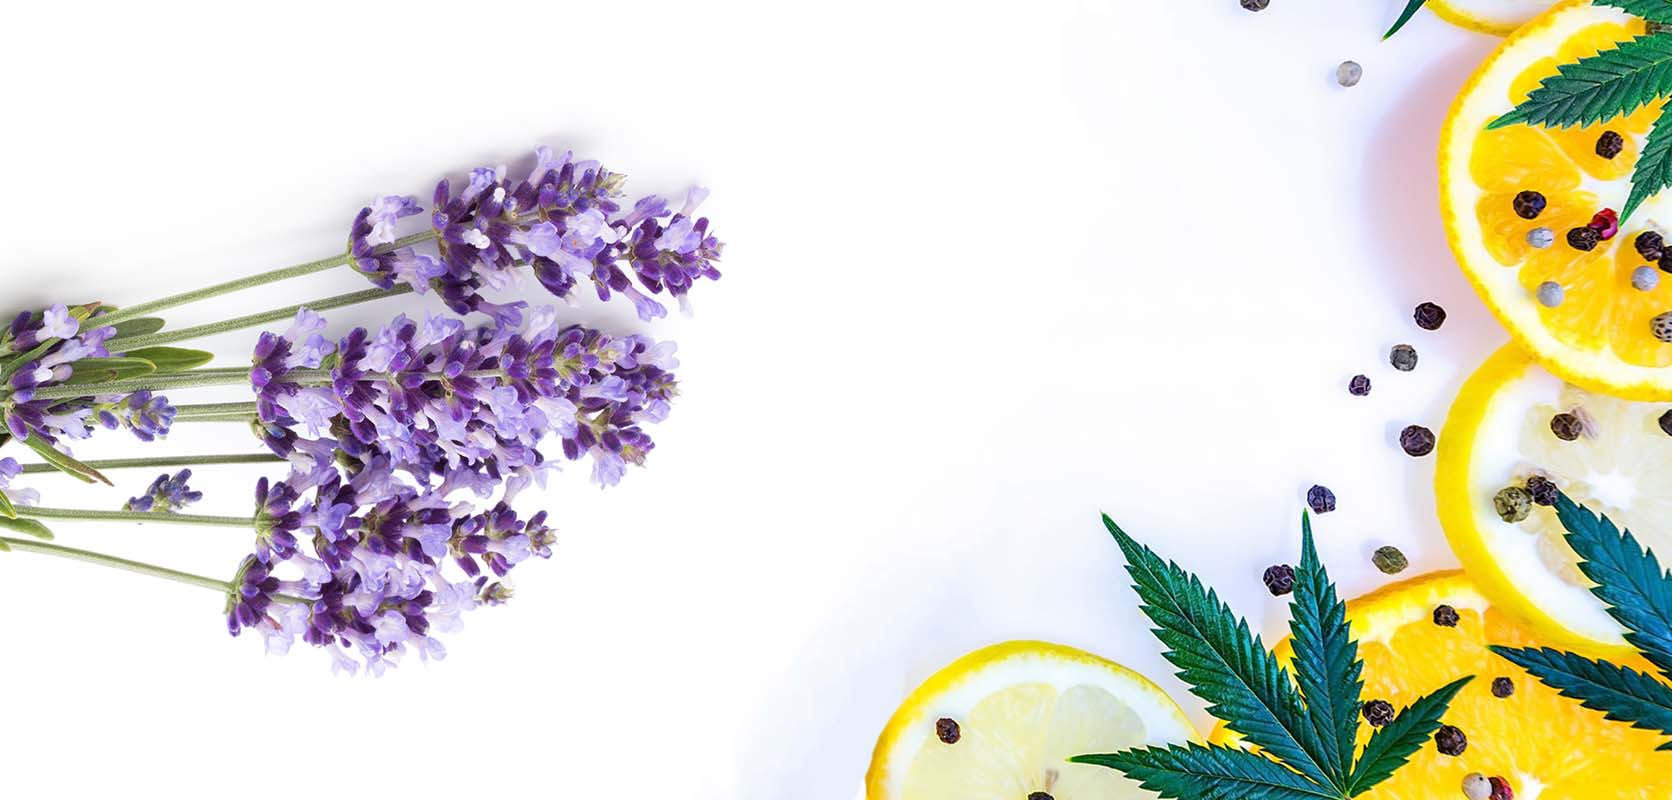 Lemon slices, cannabis leaves, flowers. canada dispensary. weed shop online. cannabis online. Dispencary.